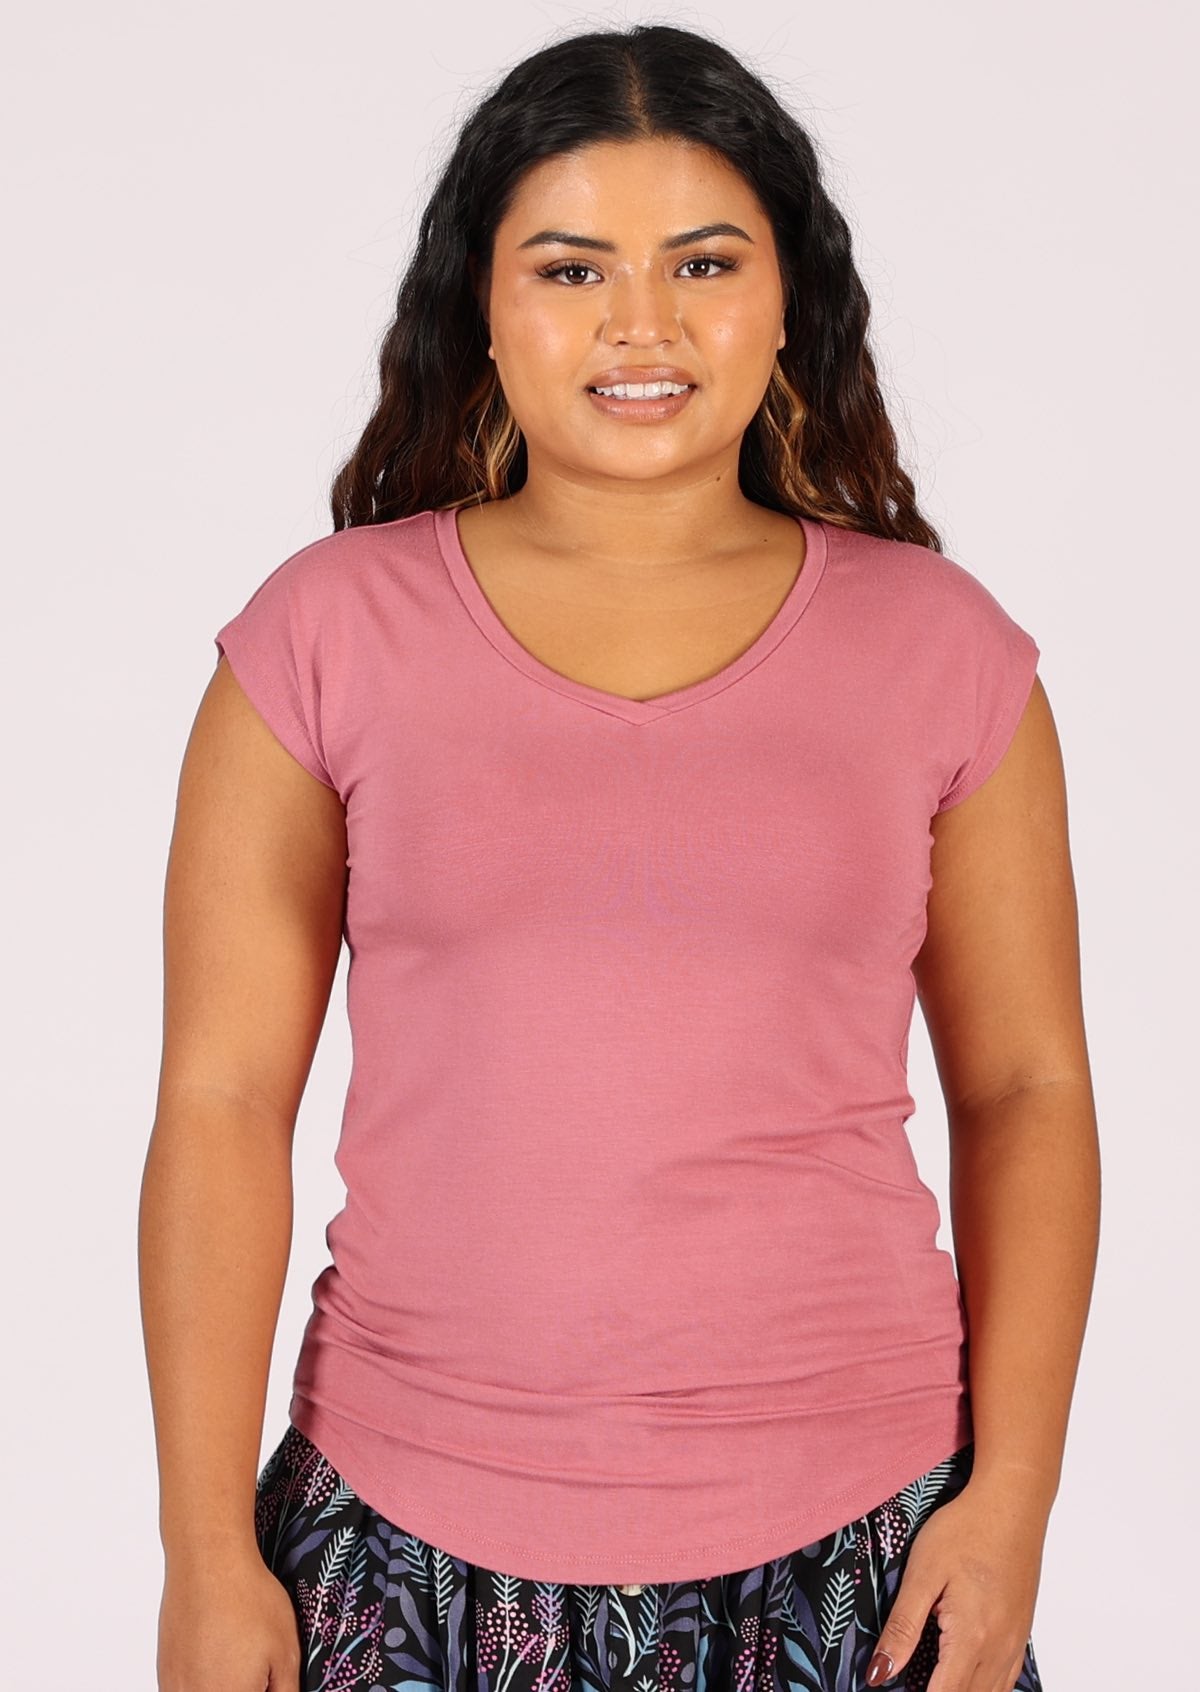 Cap sleeved soft stretch rayon top in bubblegum pink